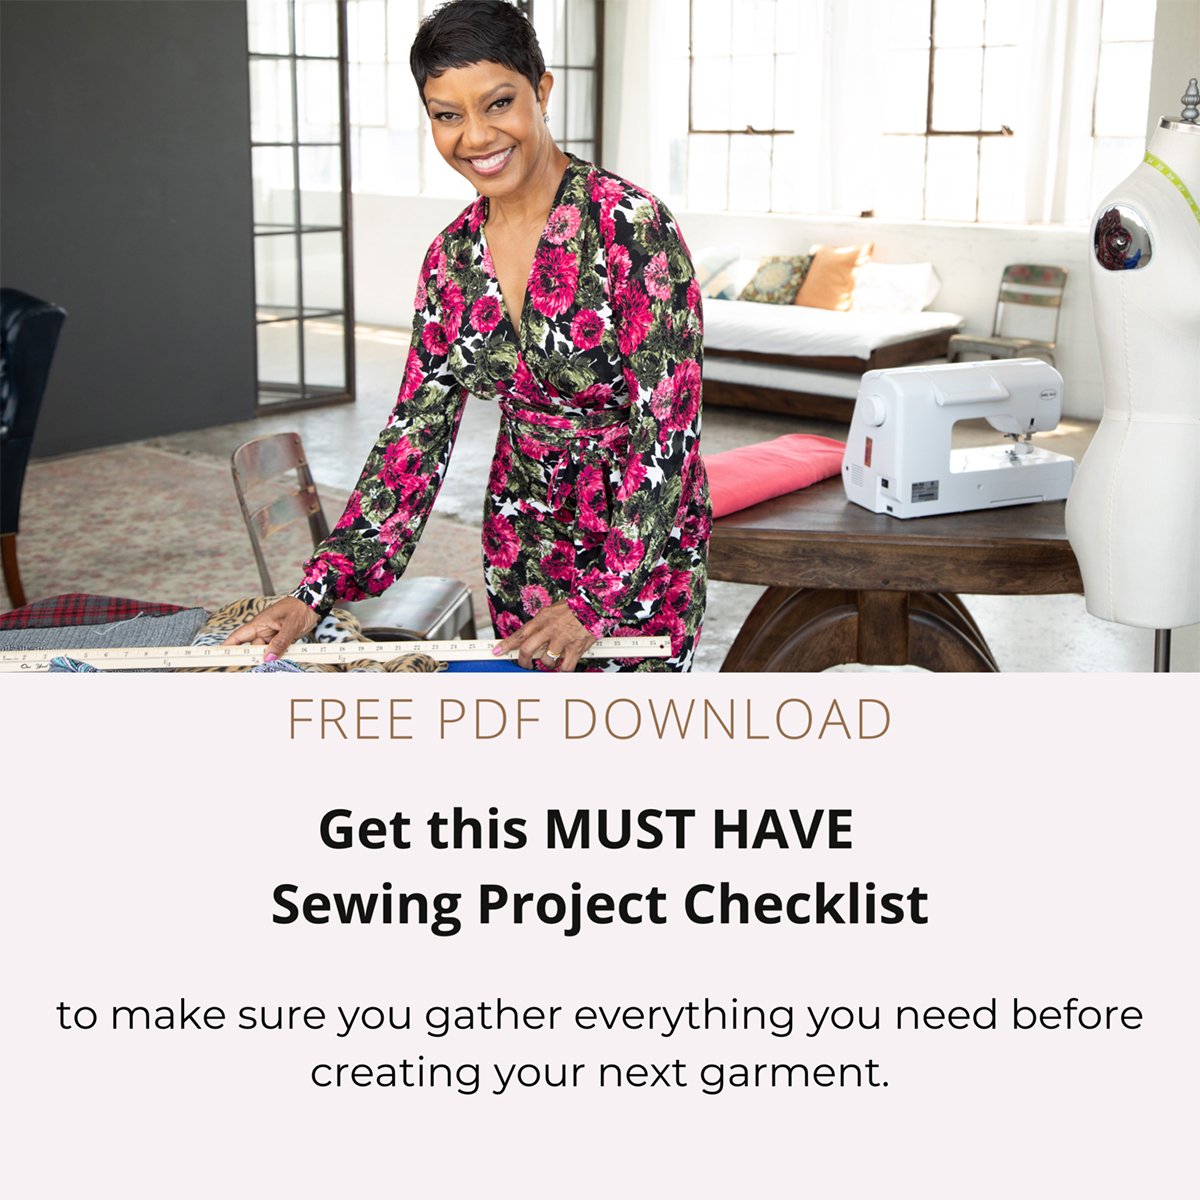 Sewing-Project-Checklist2-1536x1536